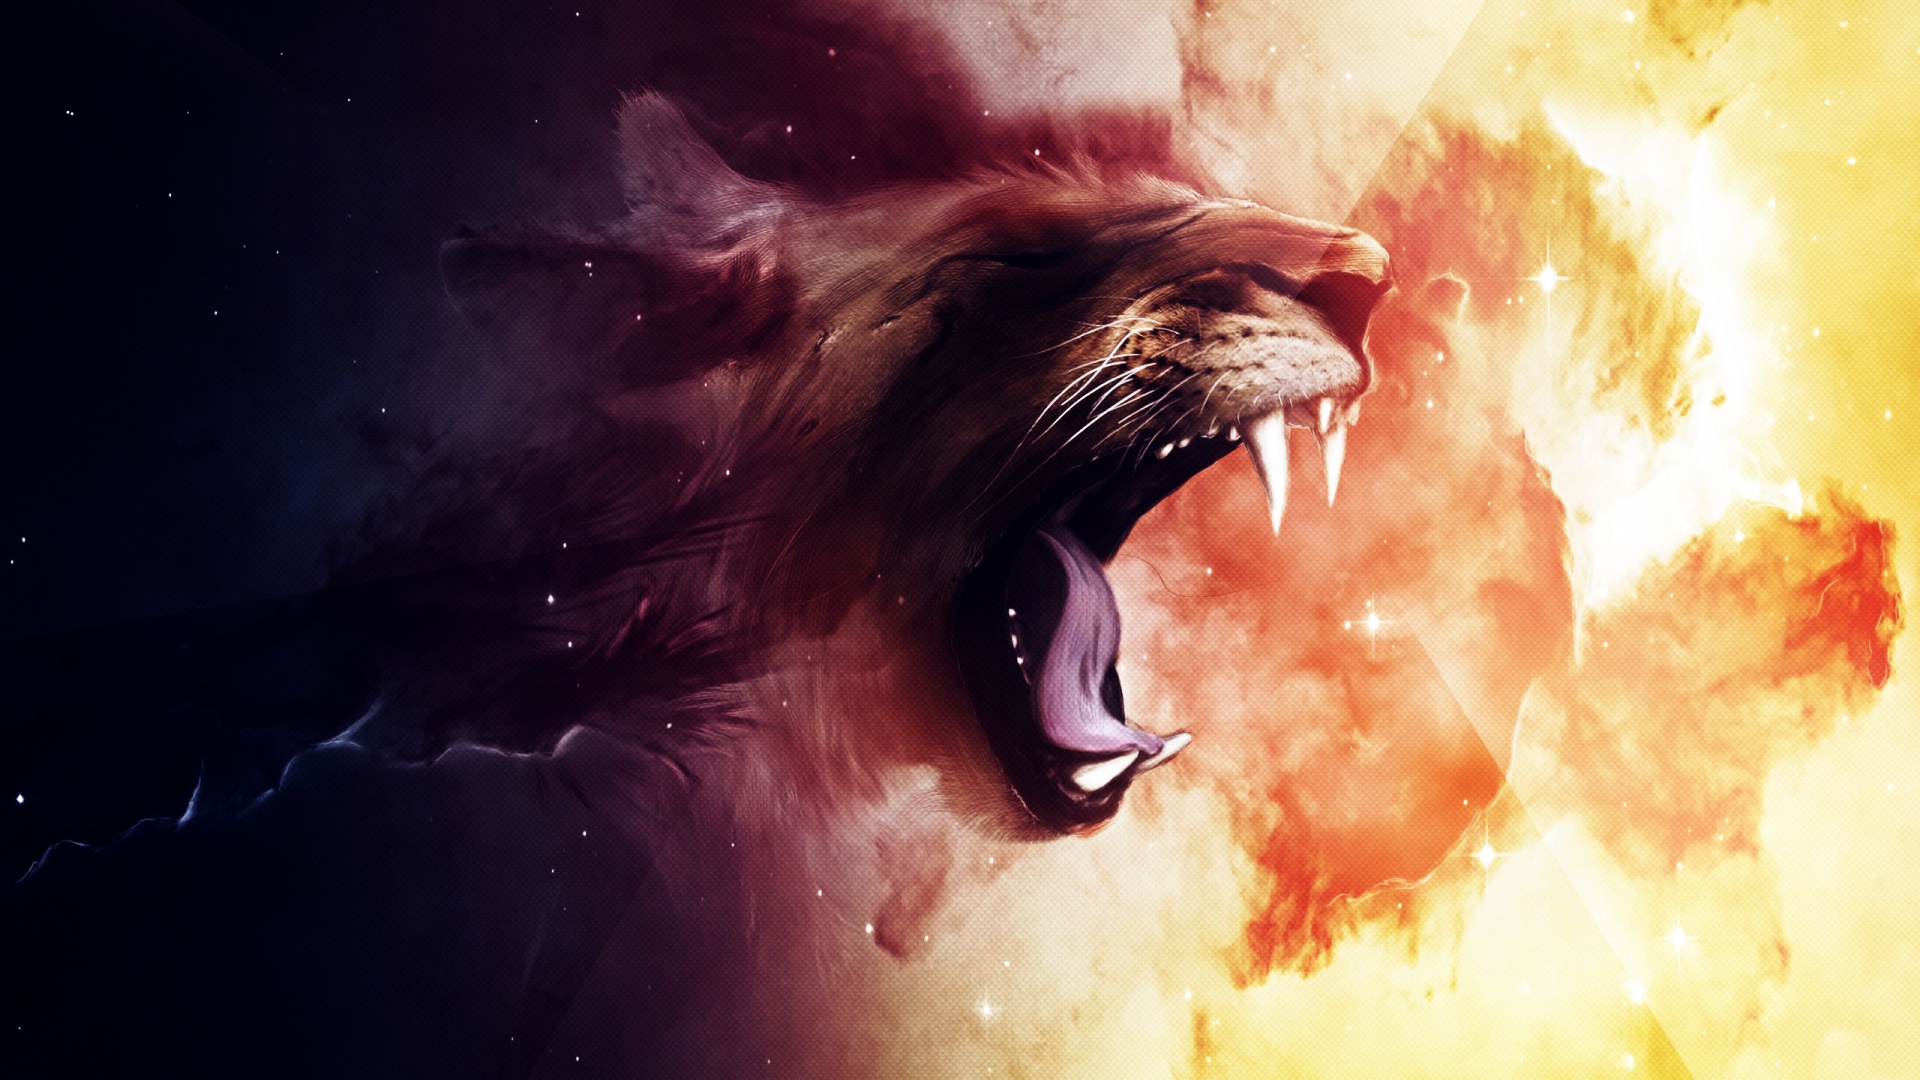 cool wallpapers for boys,snout,illustration,mouth,darkness,roar